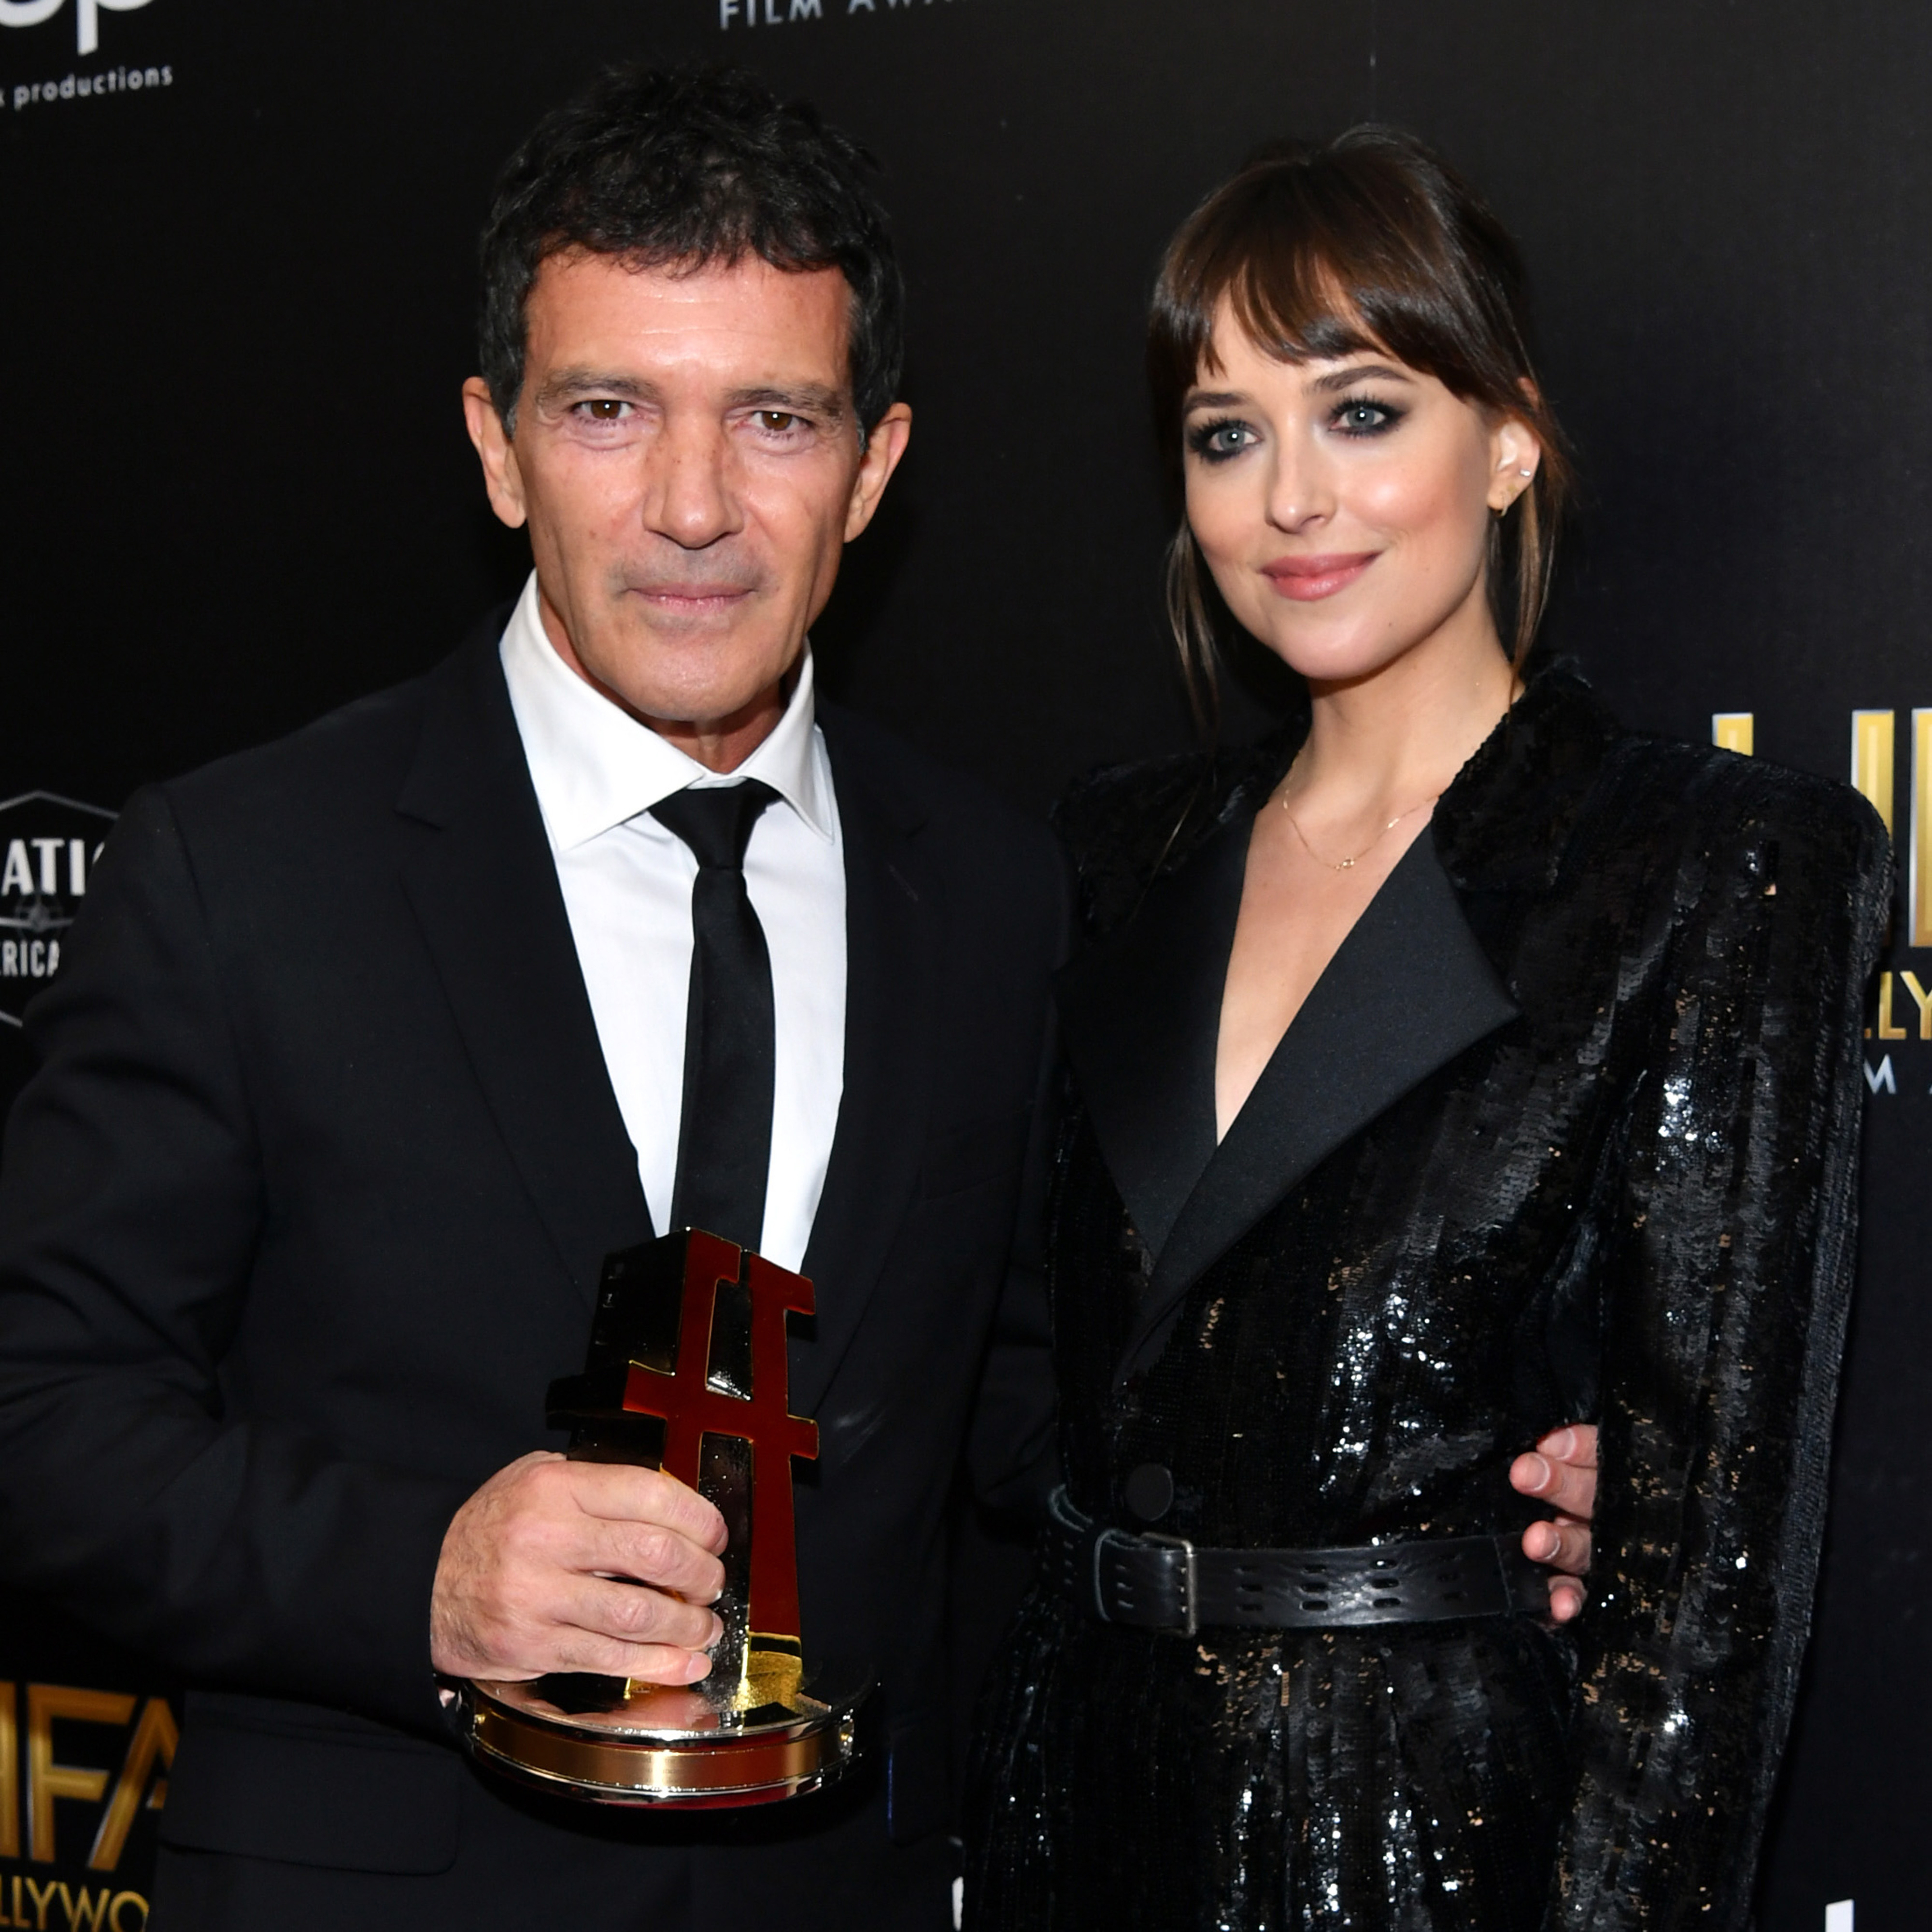 Antonio Banderas and Dakota Johnson at the 23rd Annual Hollywood Film Awards in Beverly Hills, California on November 3, 2019 | Source: Getty Images